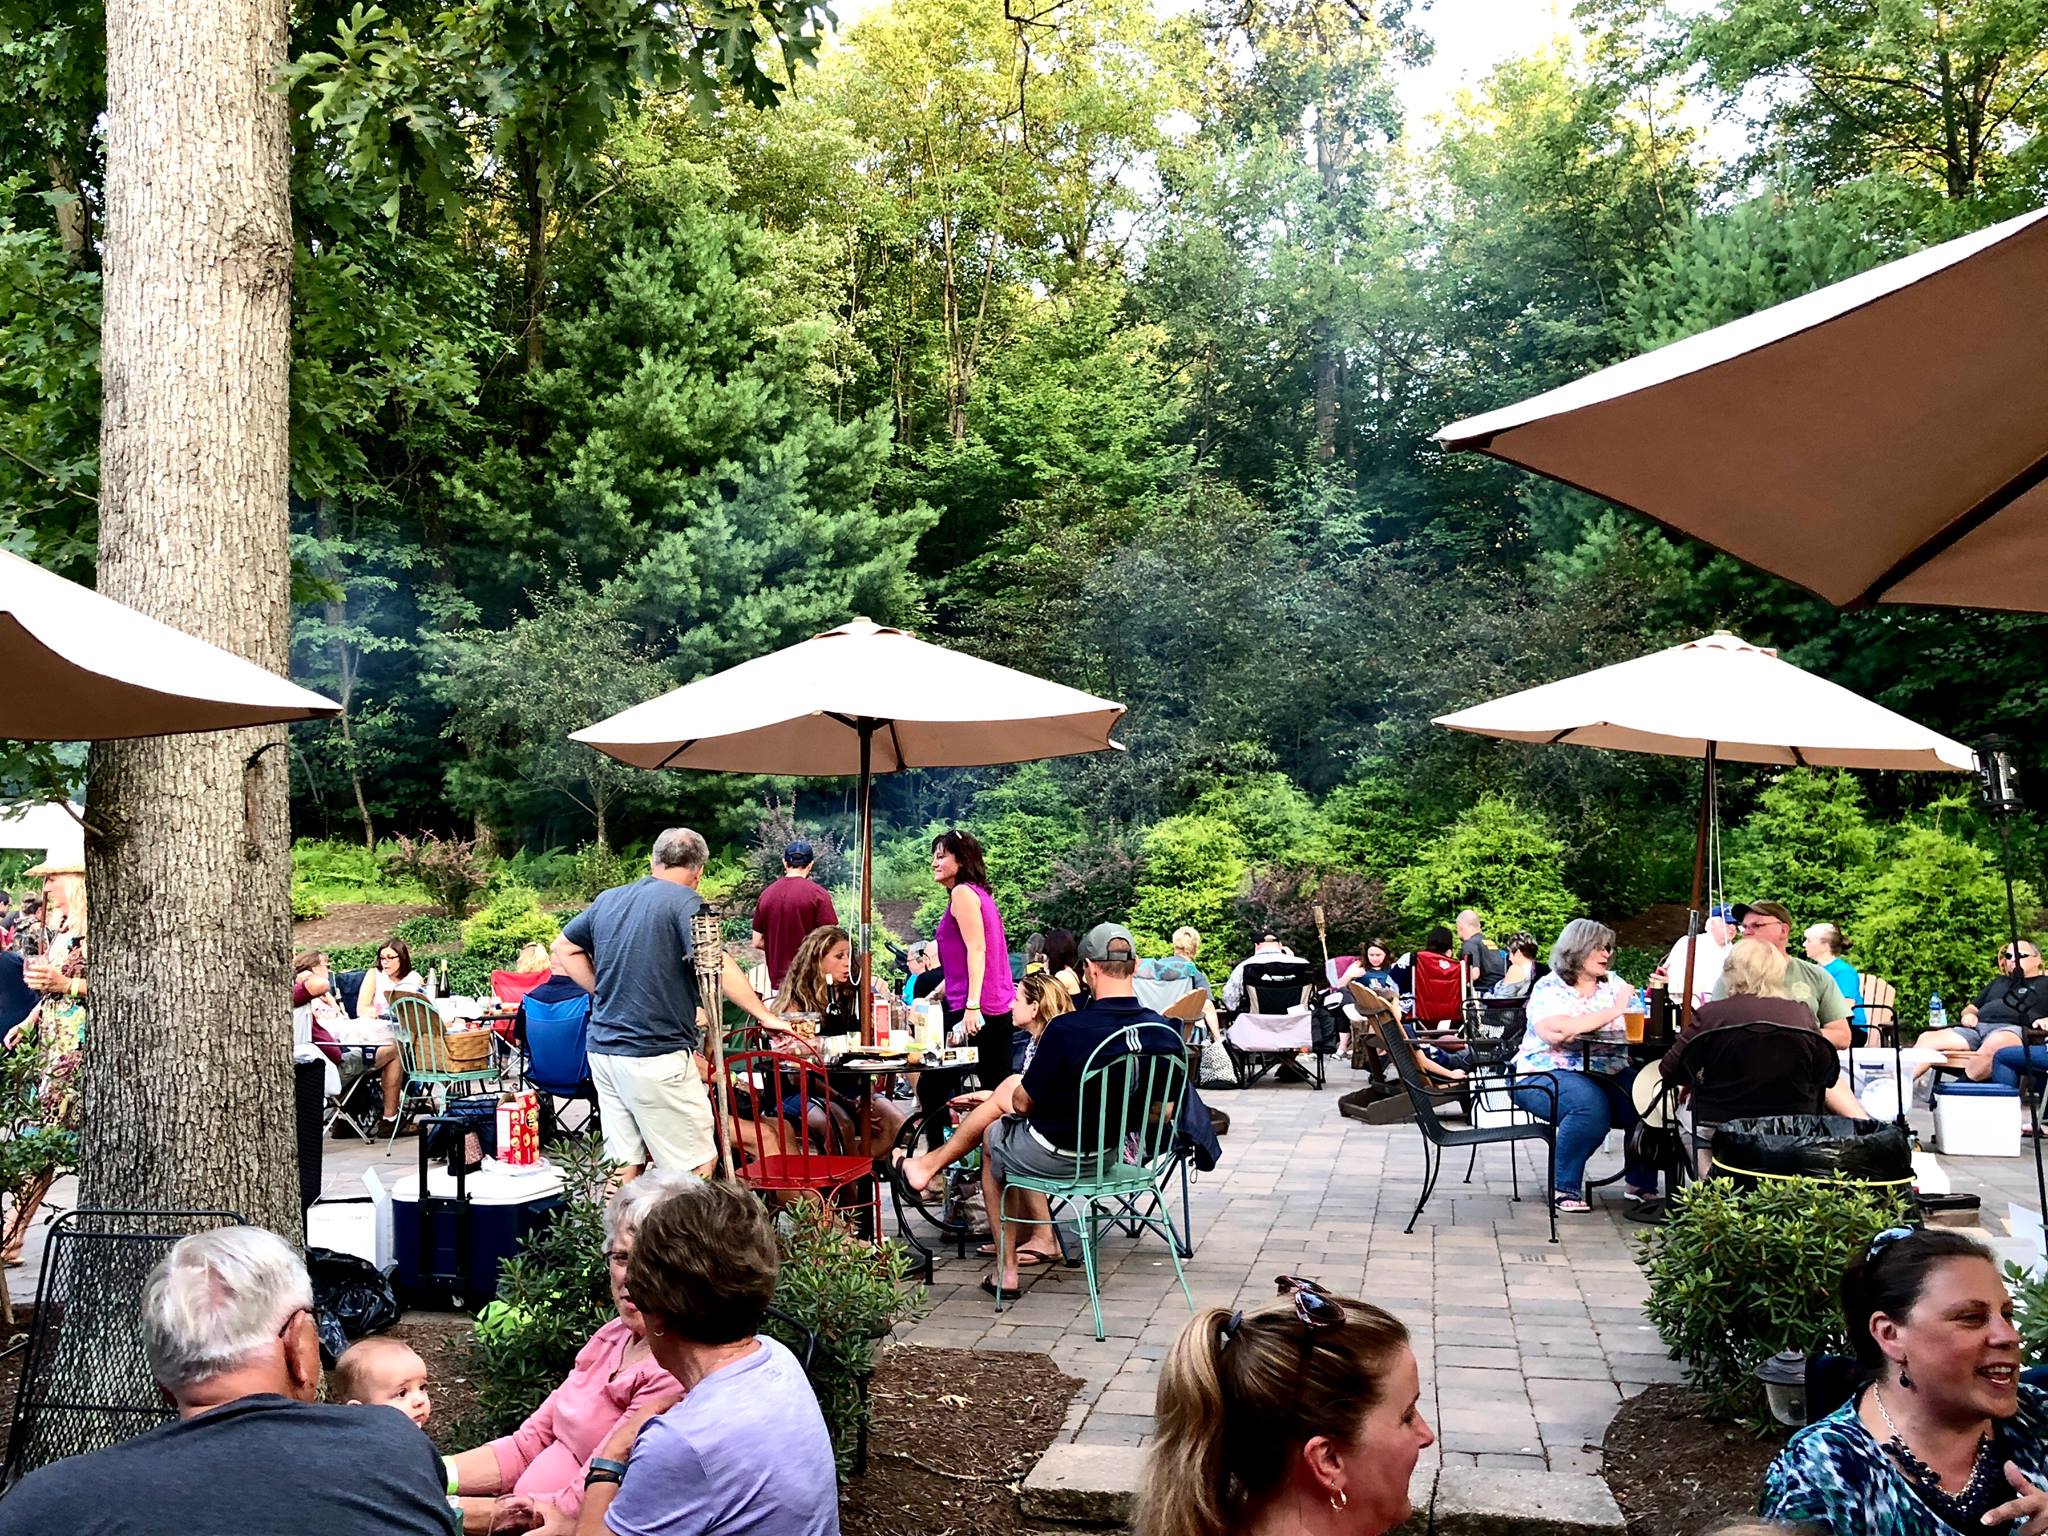 A photo of an outdoor patio filled with people enjoying wine under umbrellas at Seven Mountain Wine Cellars in Pennsylvania